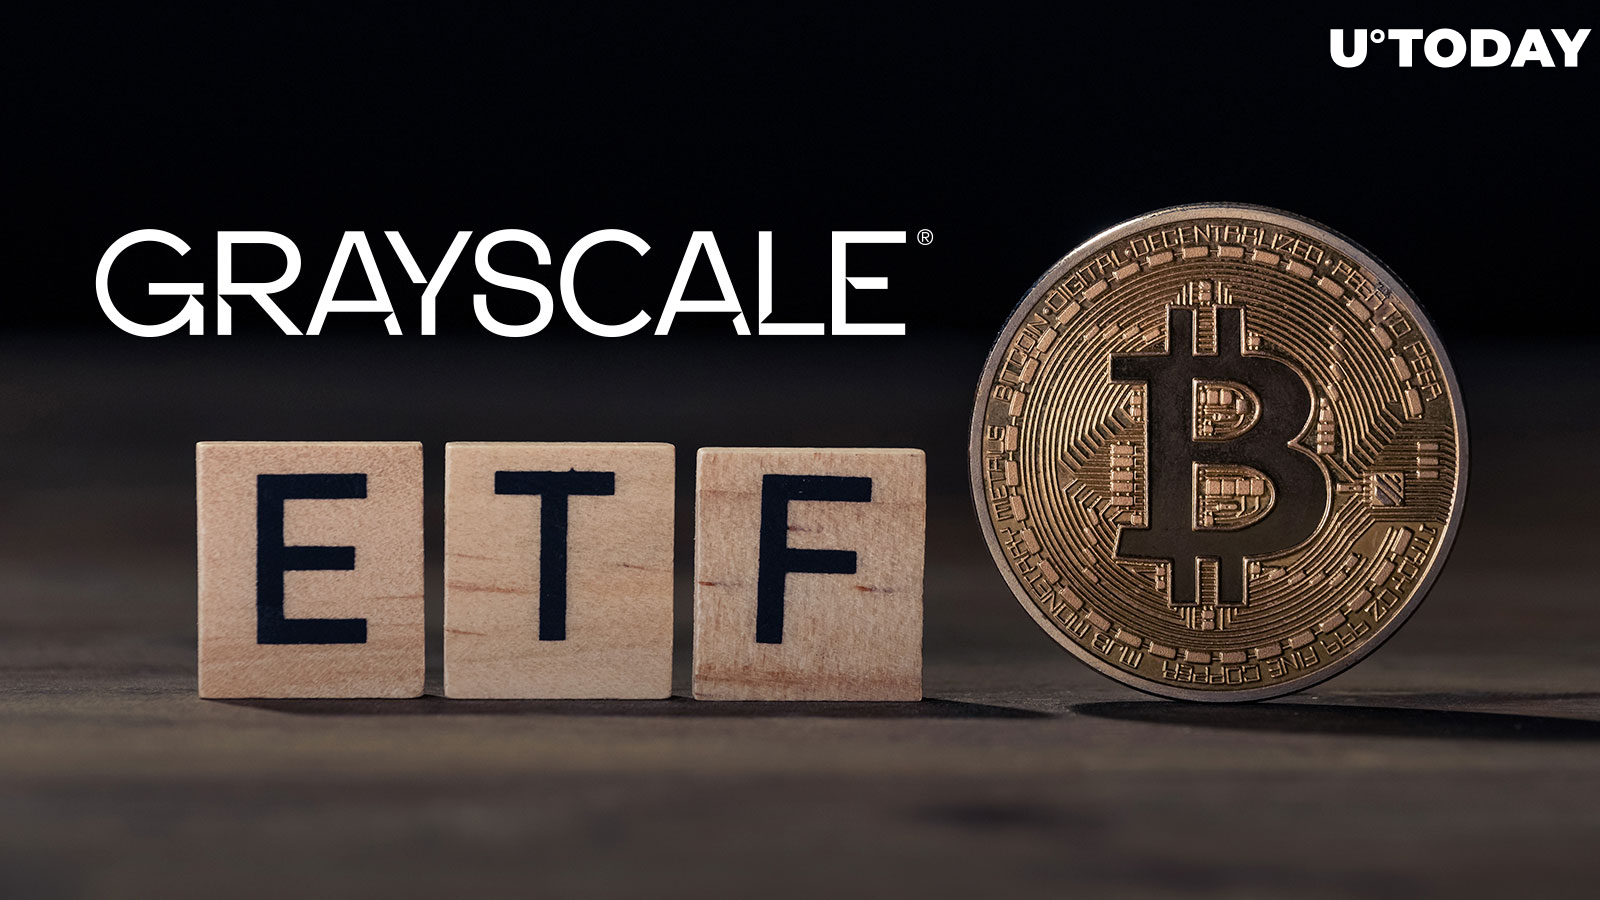 Grayscale’s Bitcoin ETF No Longer in Lead by Daily Outflows